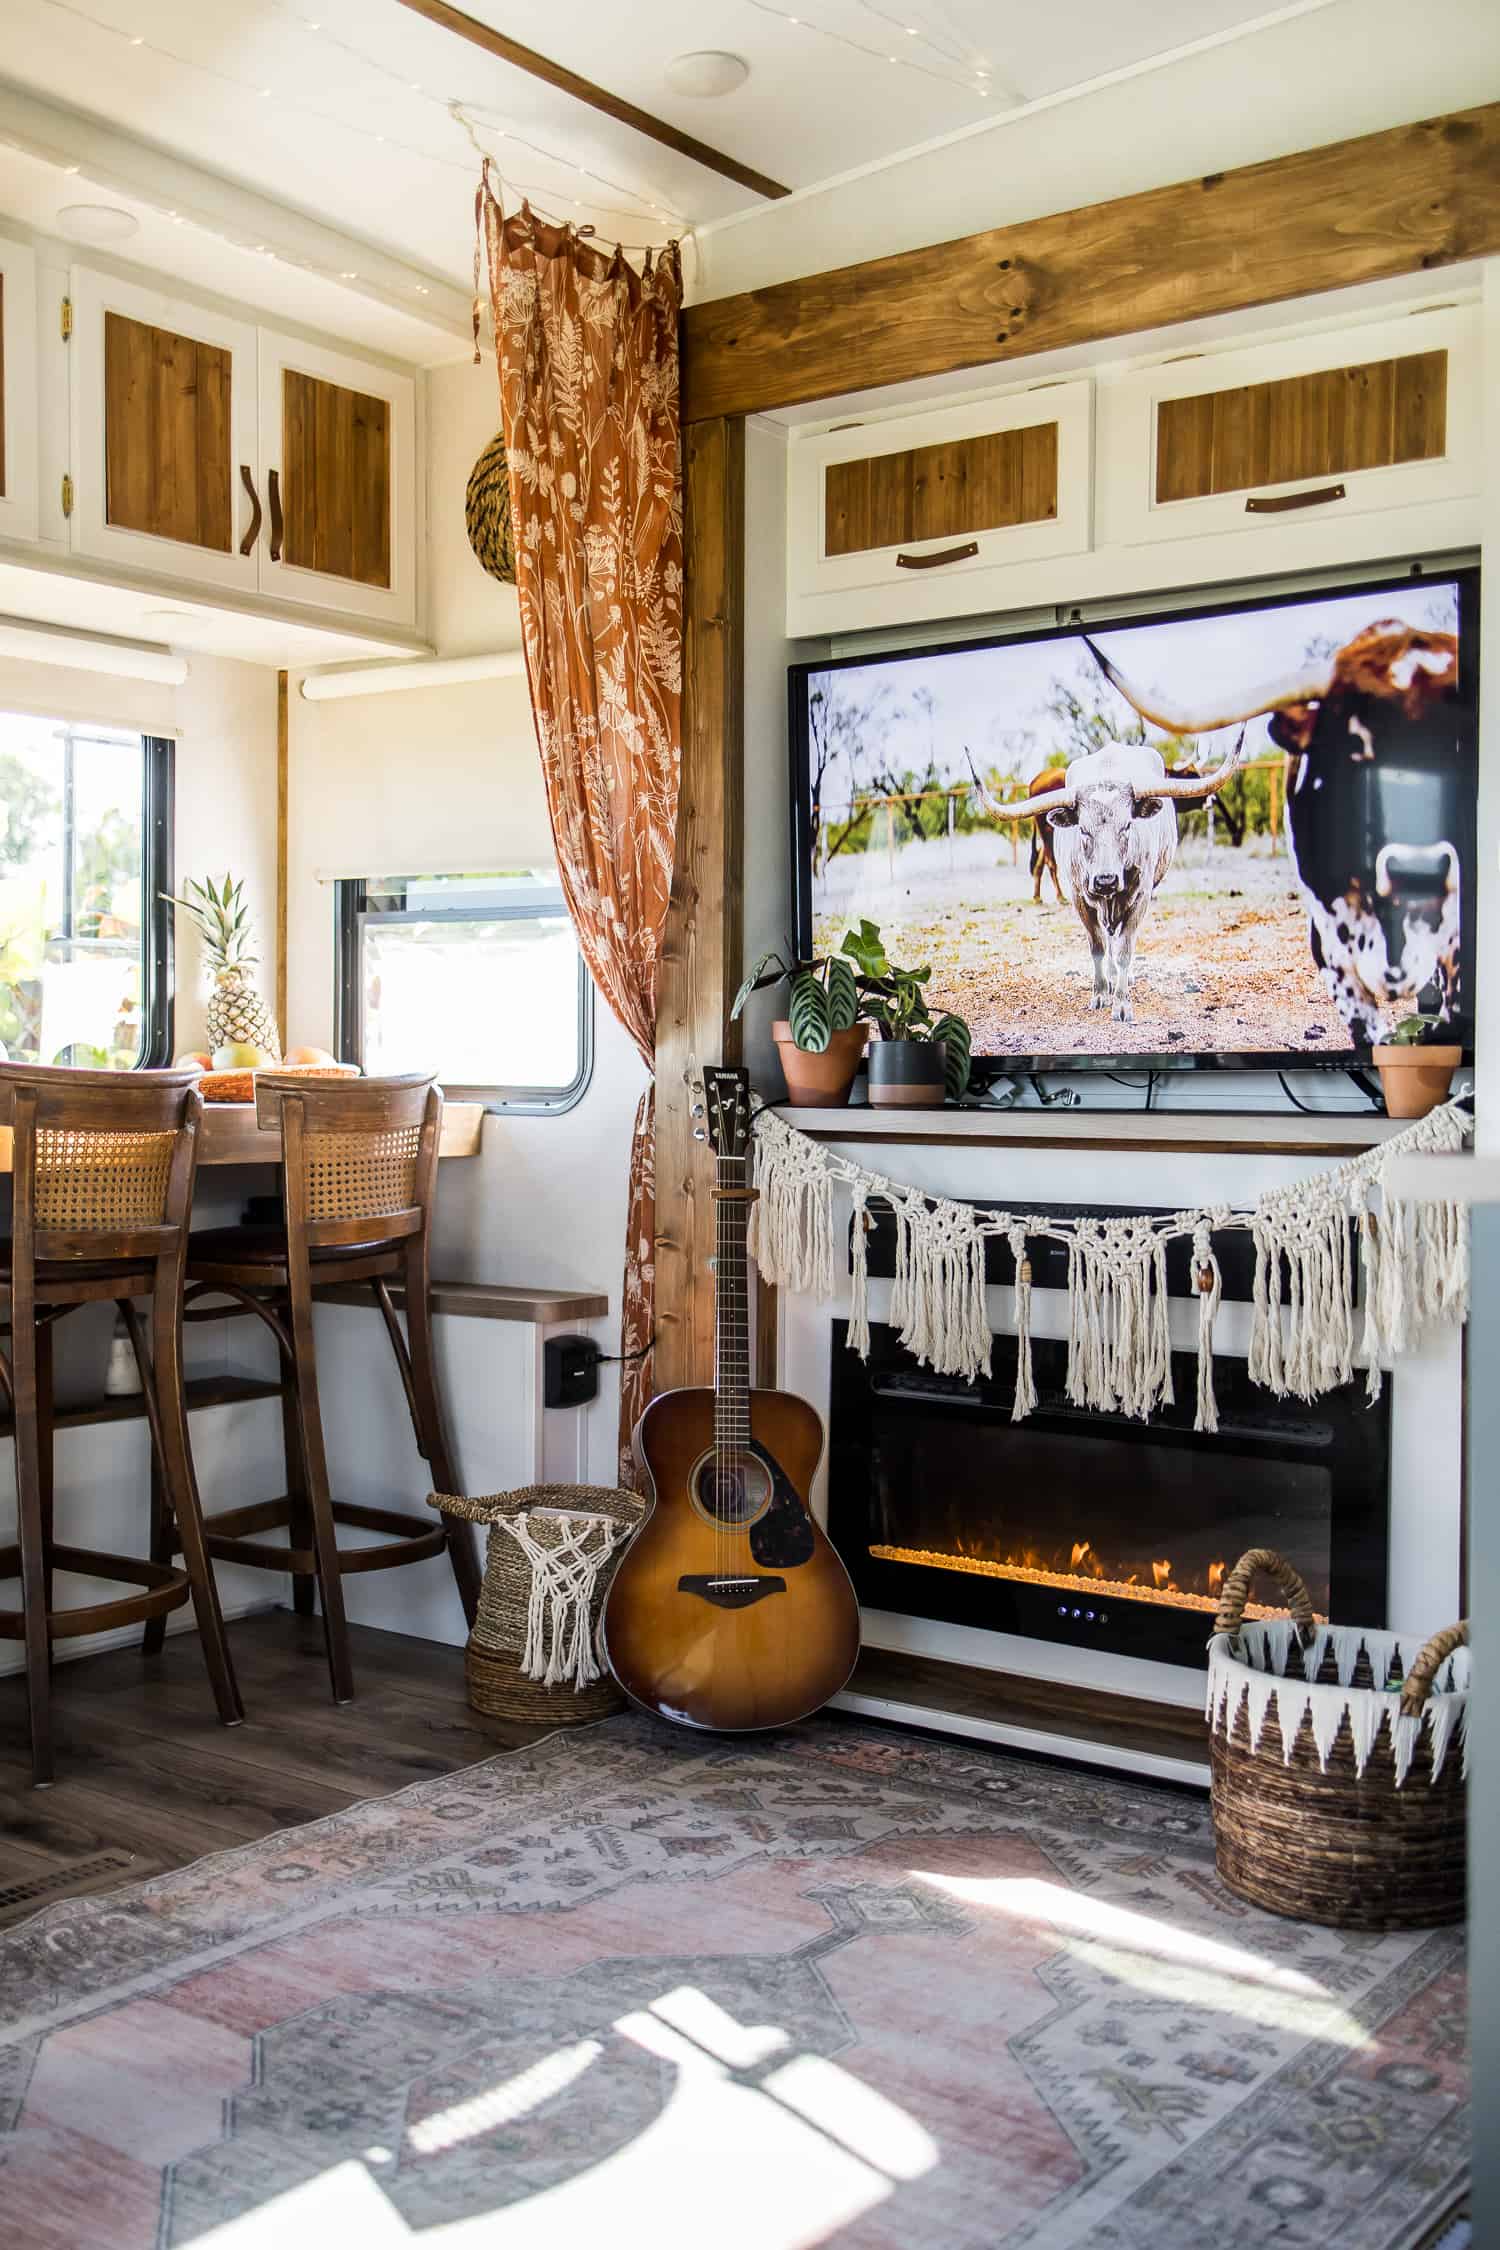 Large TV with macrame garland underneath in camper's living space.